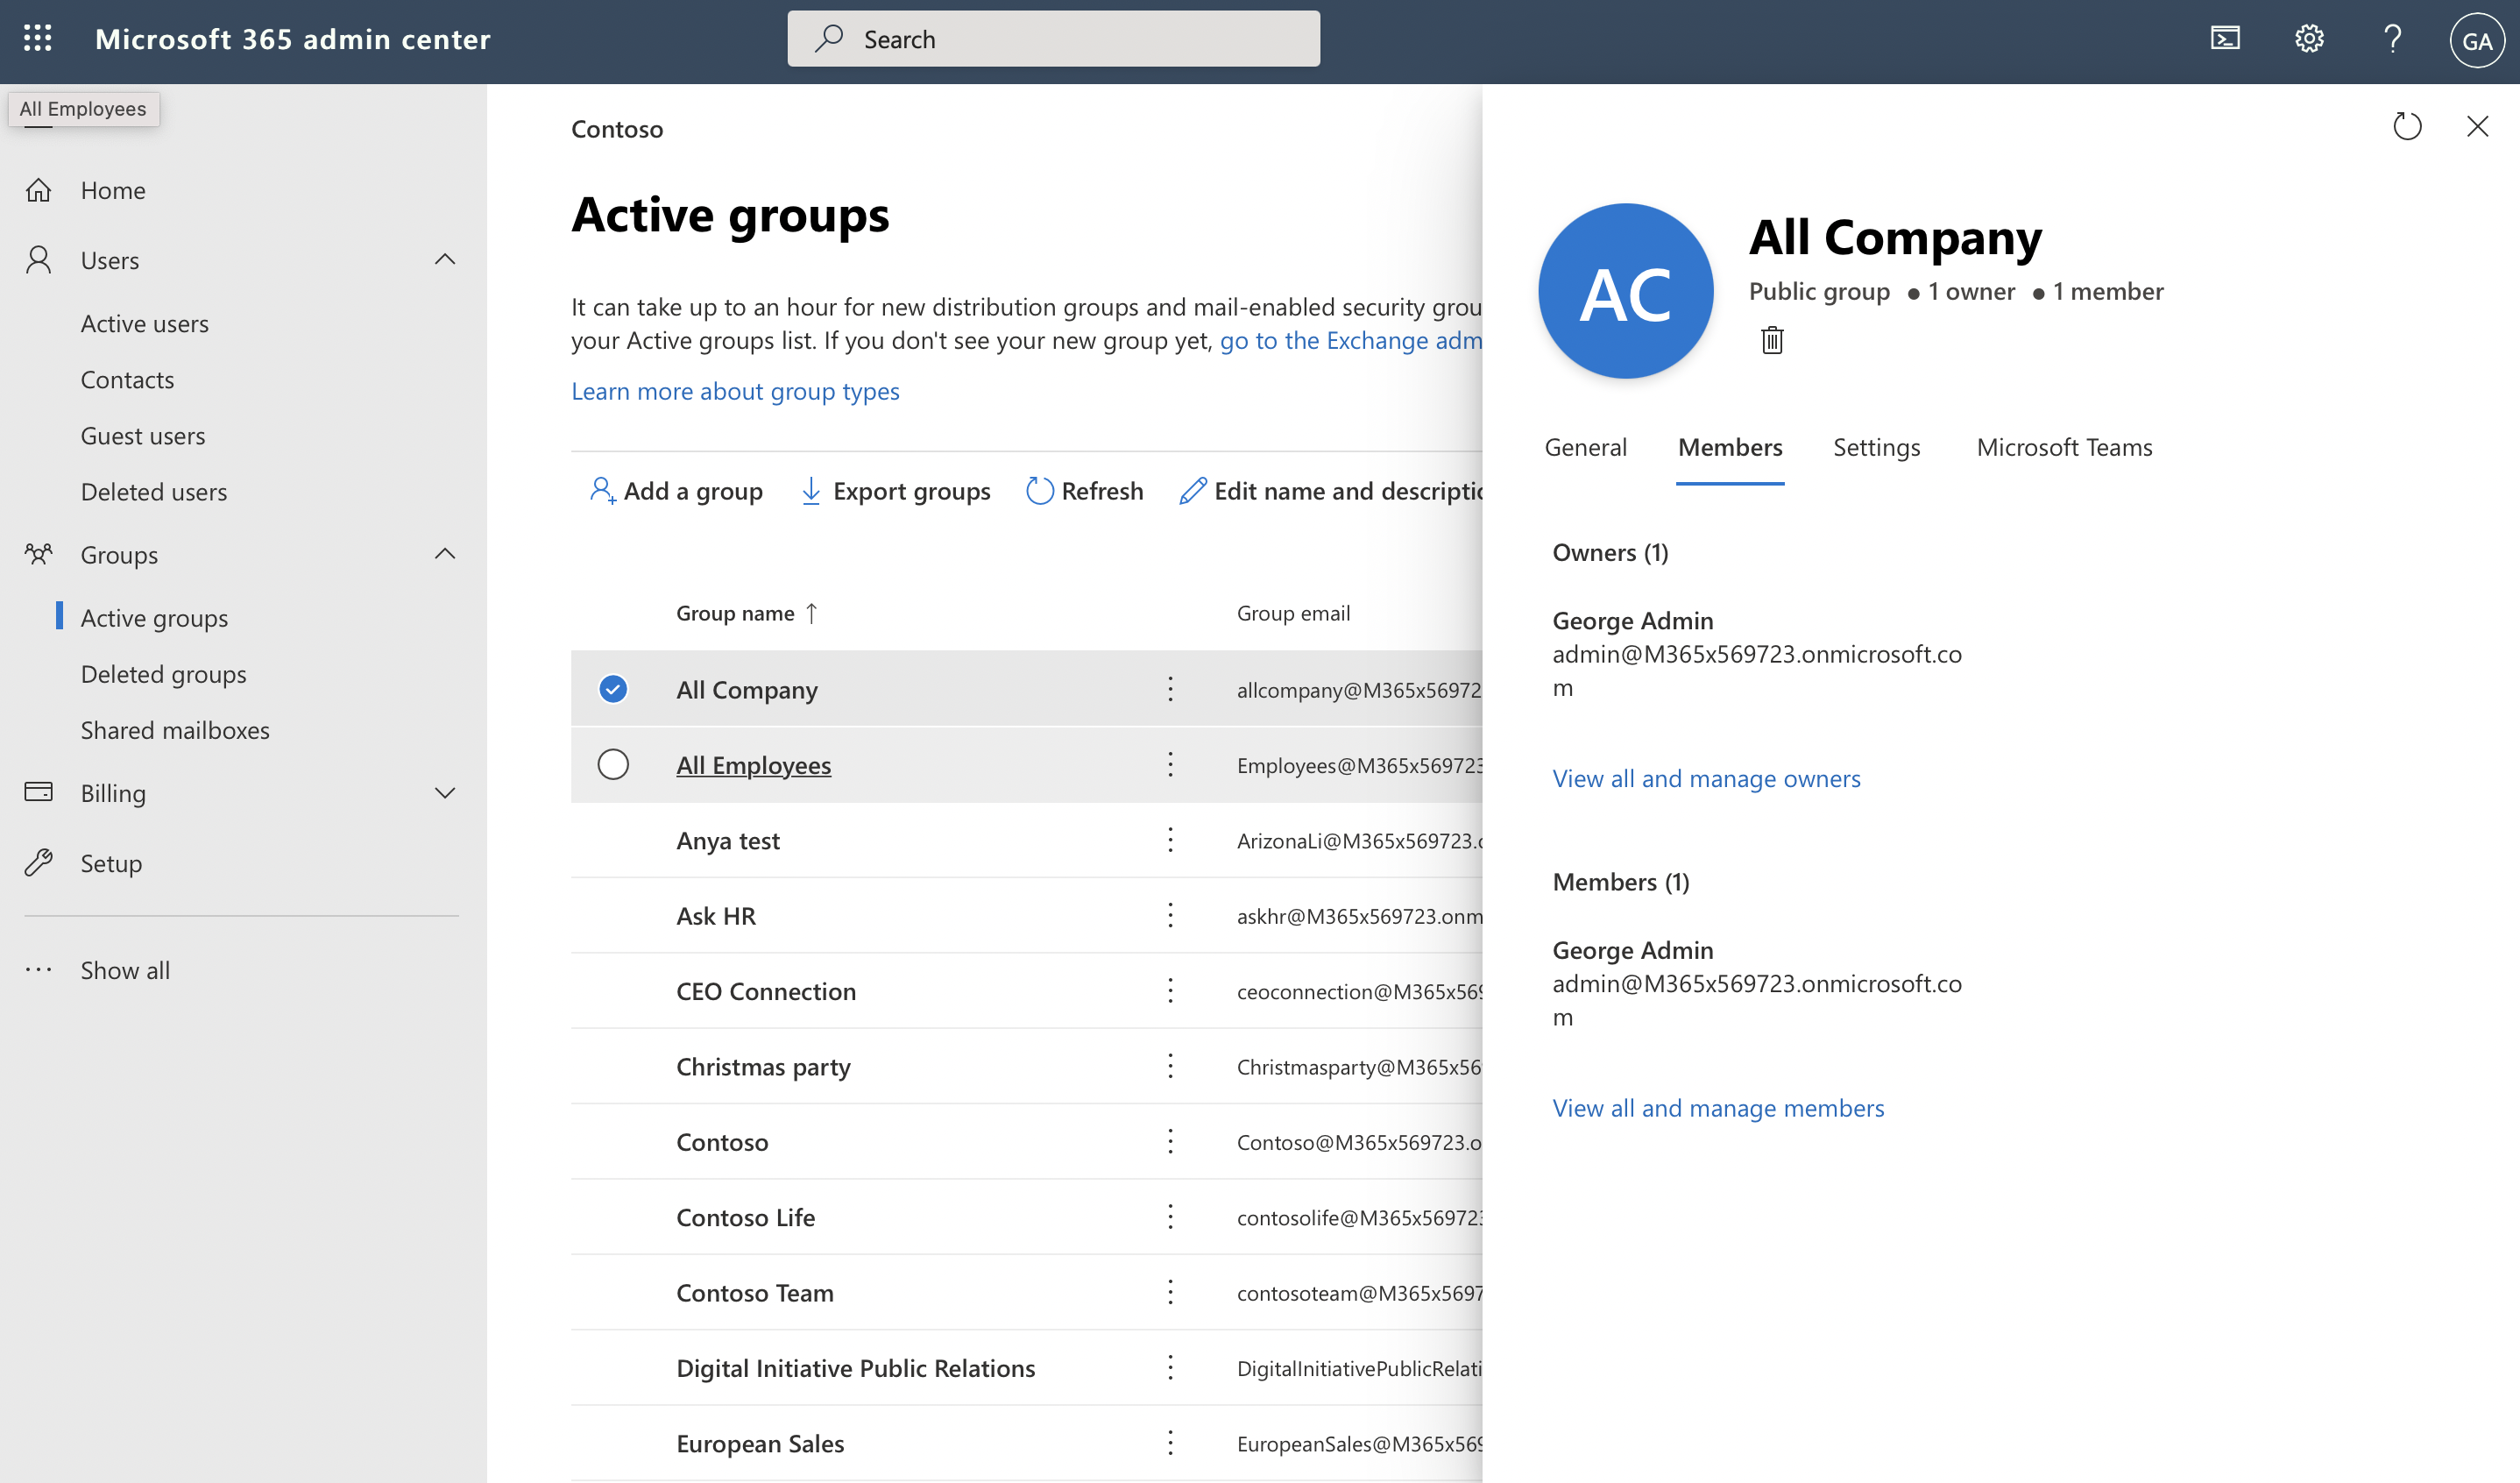 Screenshot of details for a Microsoft 365 group in the admin center.